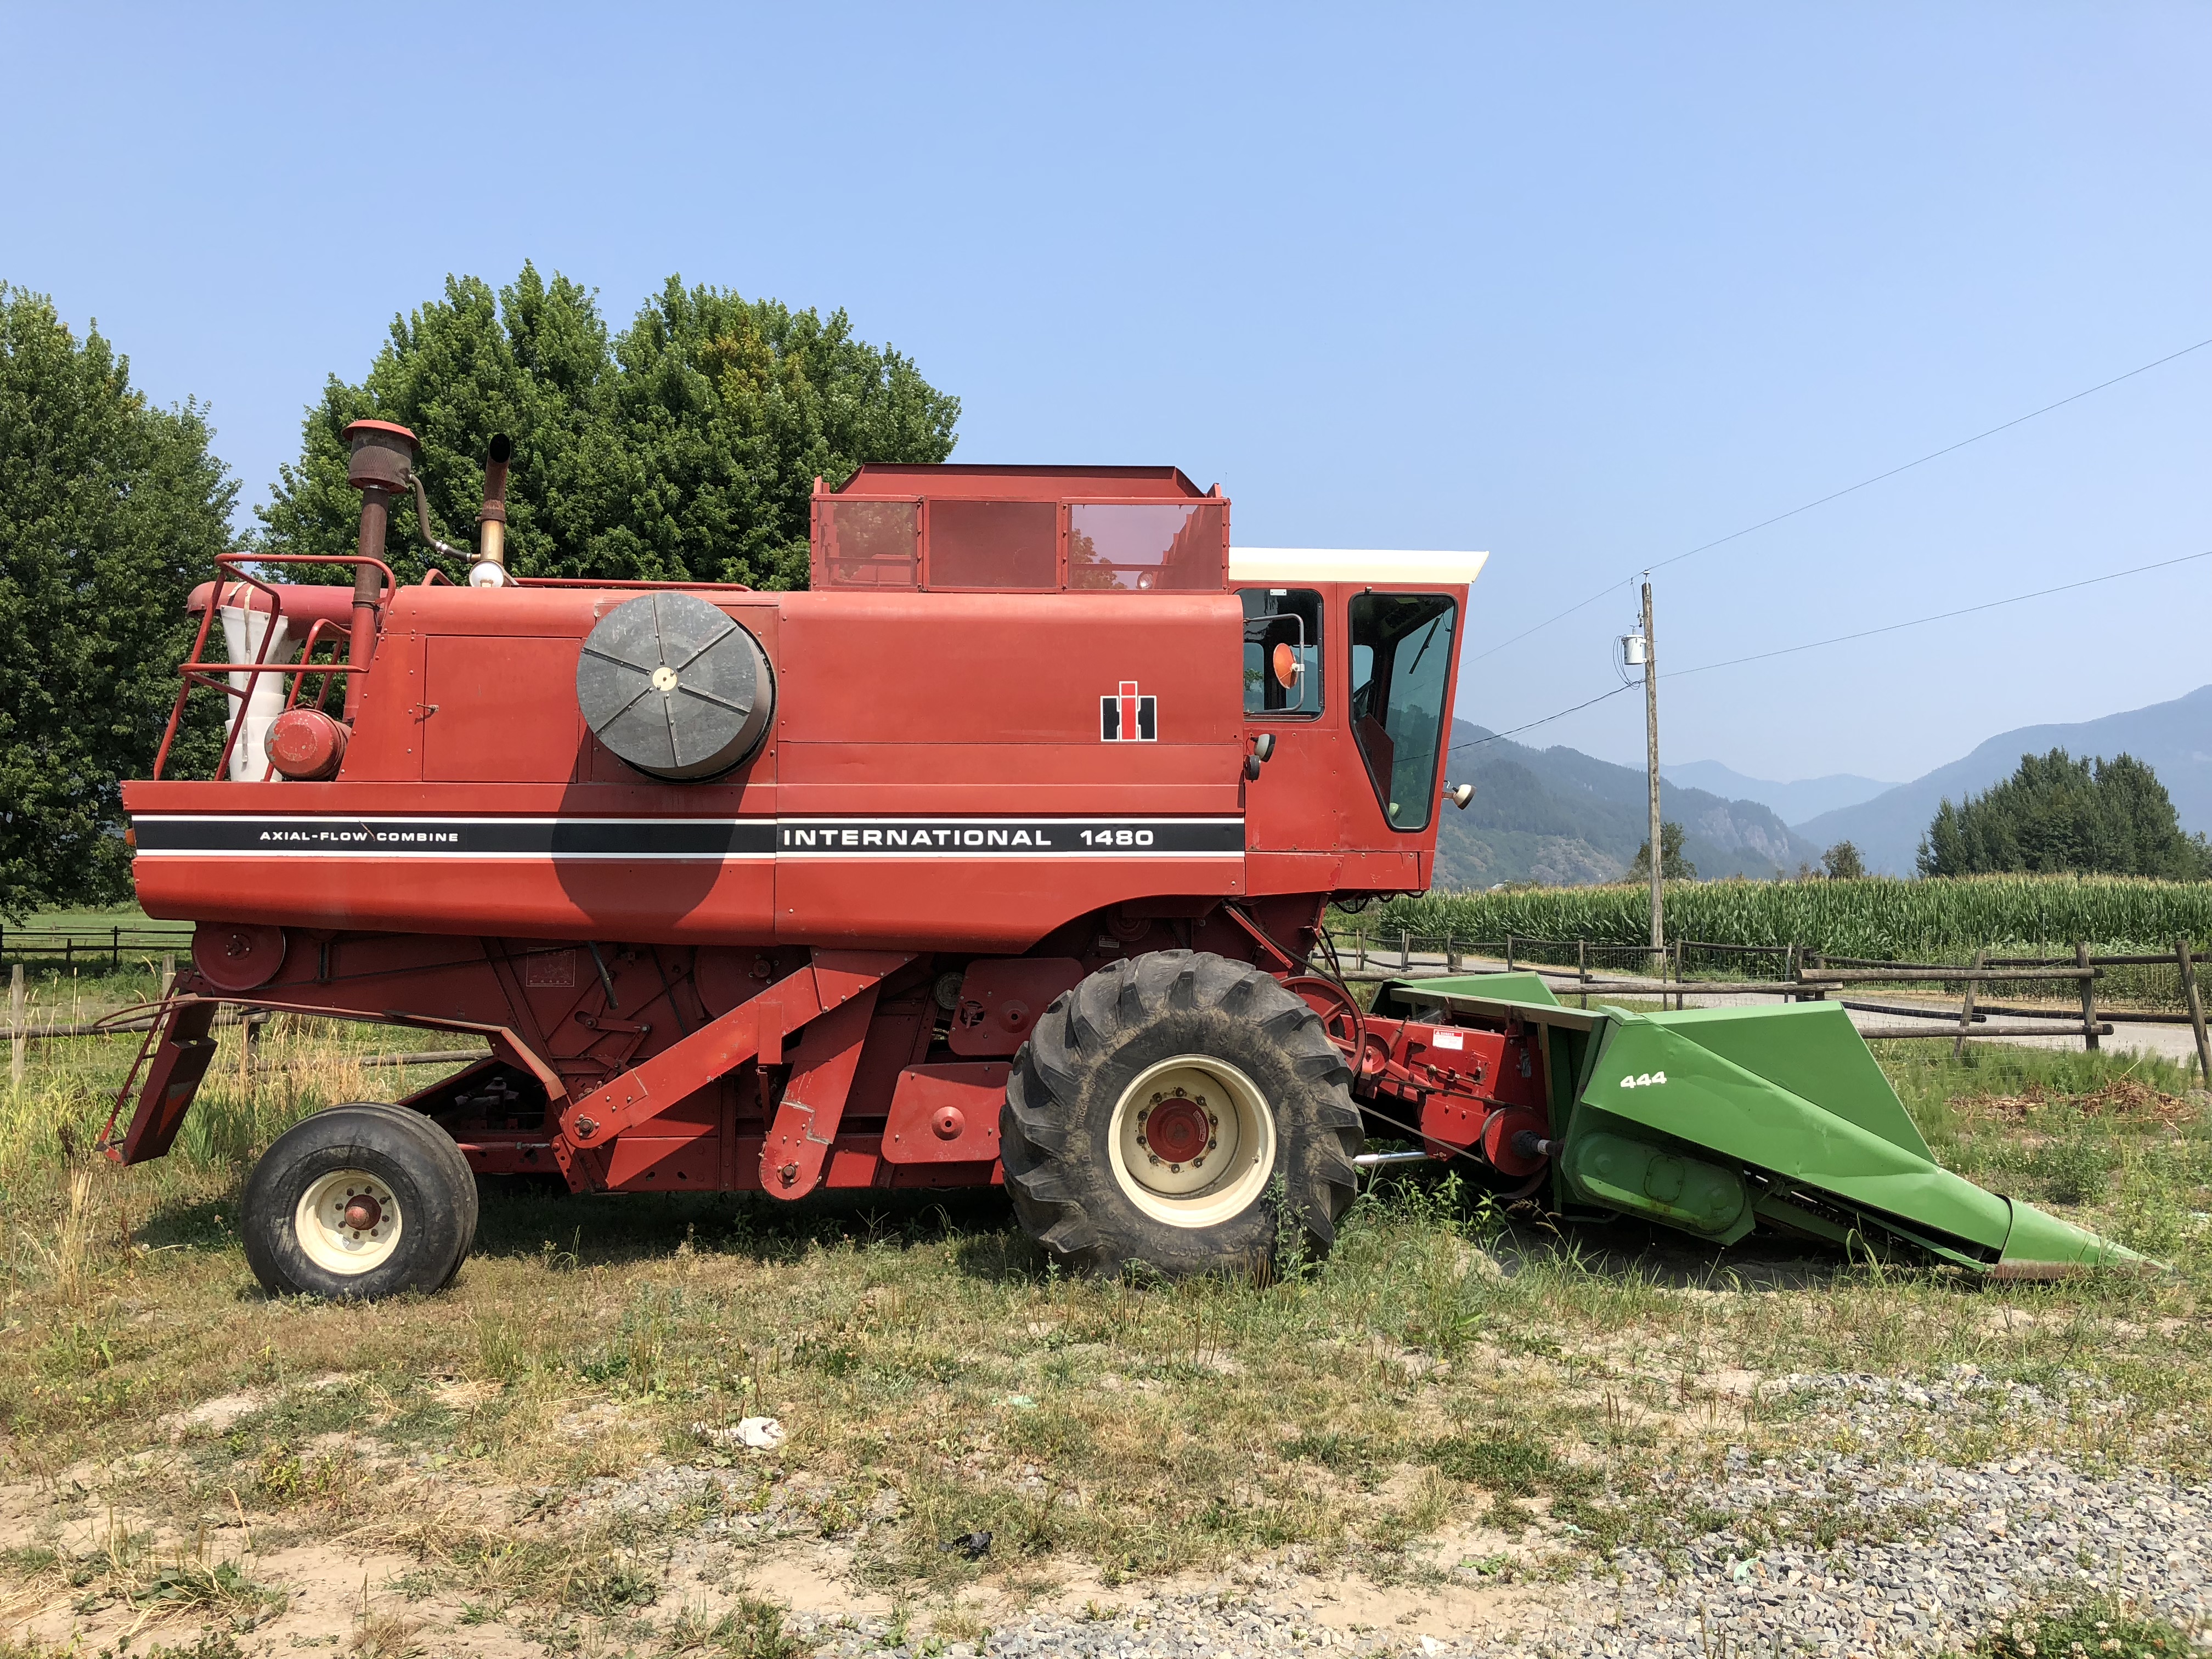 Colour photograph of a red International combine in a field.